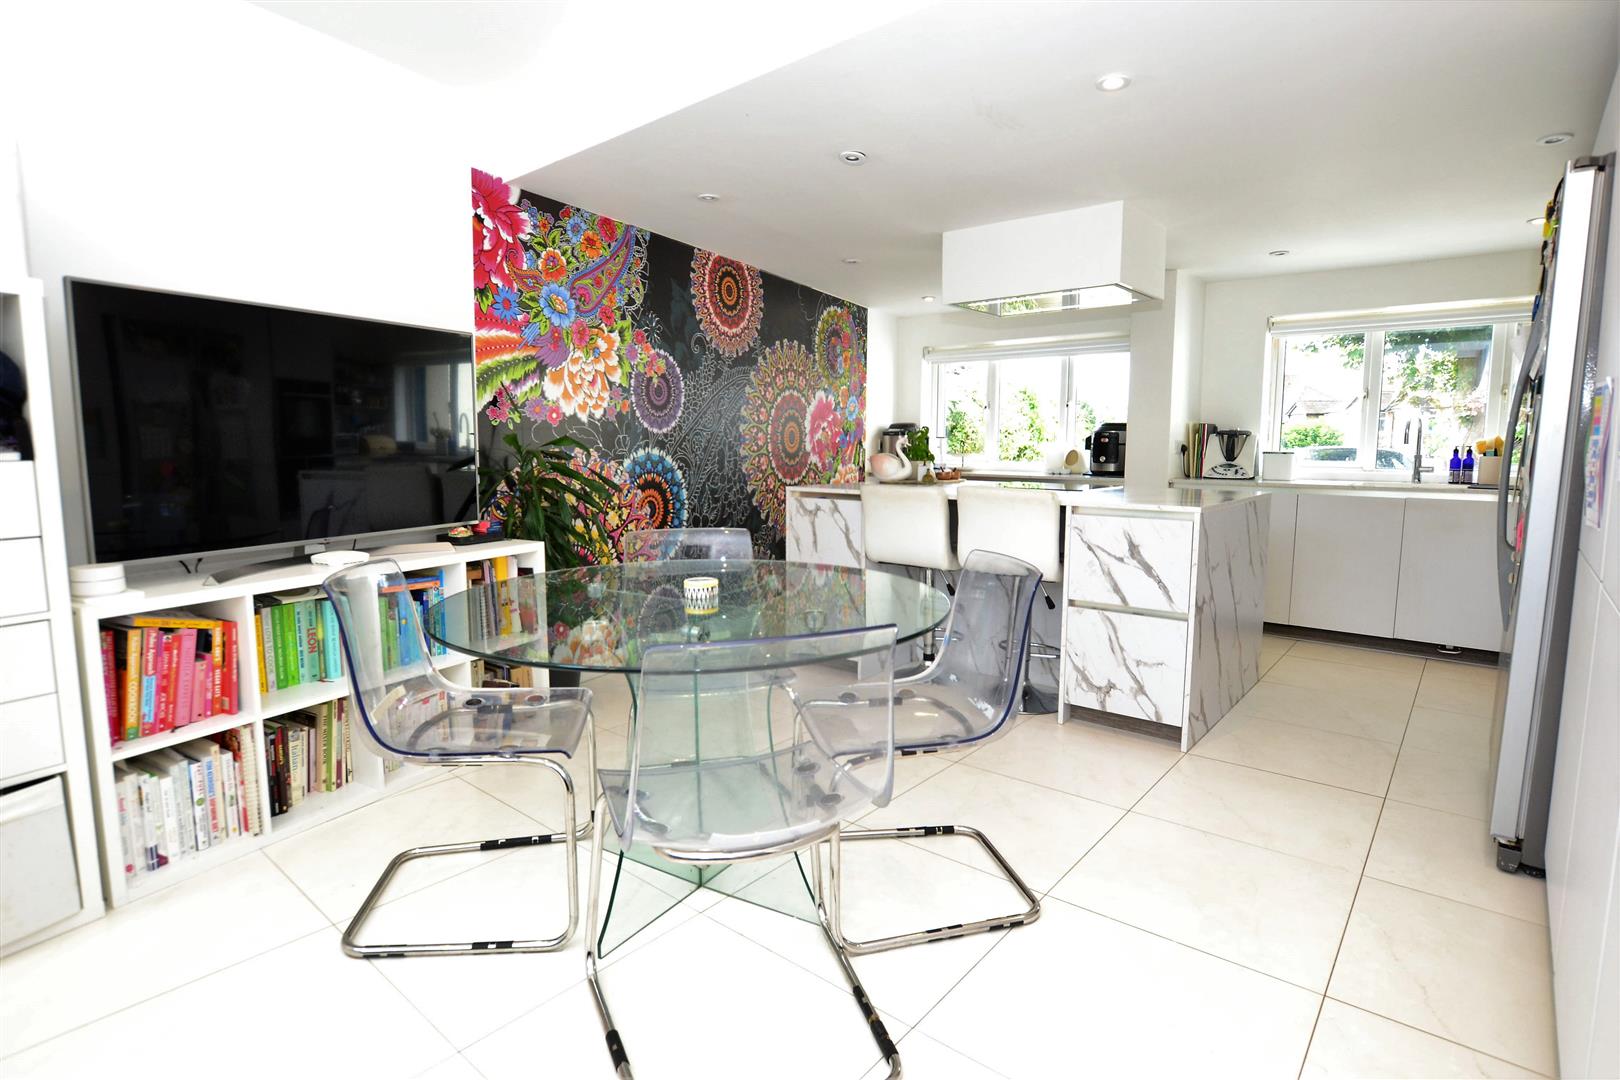 Woodcote Way Caversham house for sale in Reading